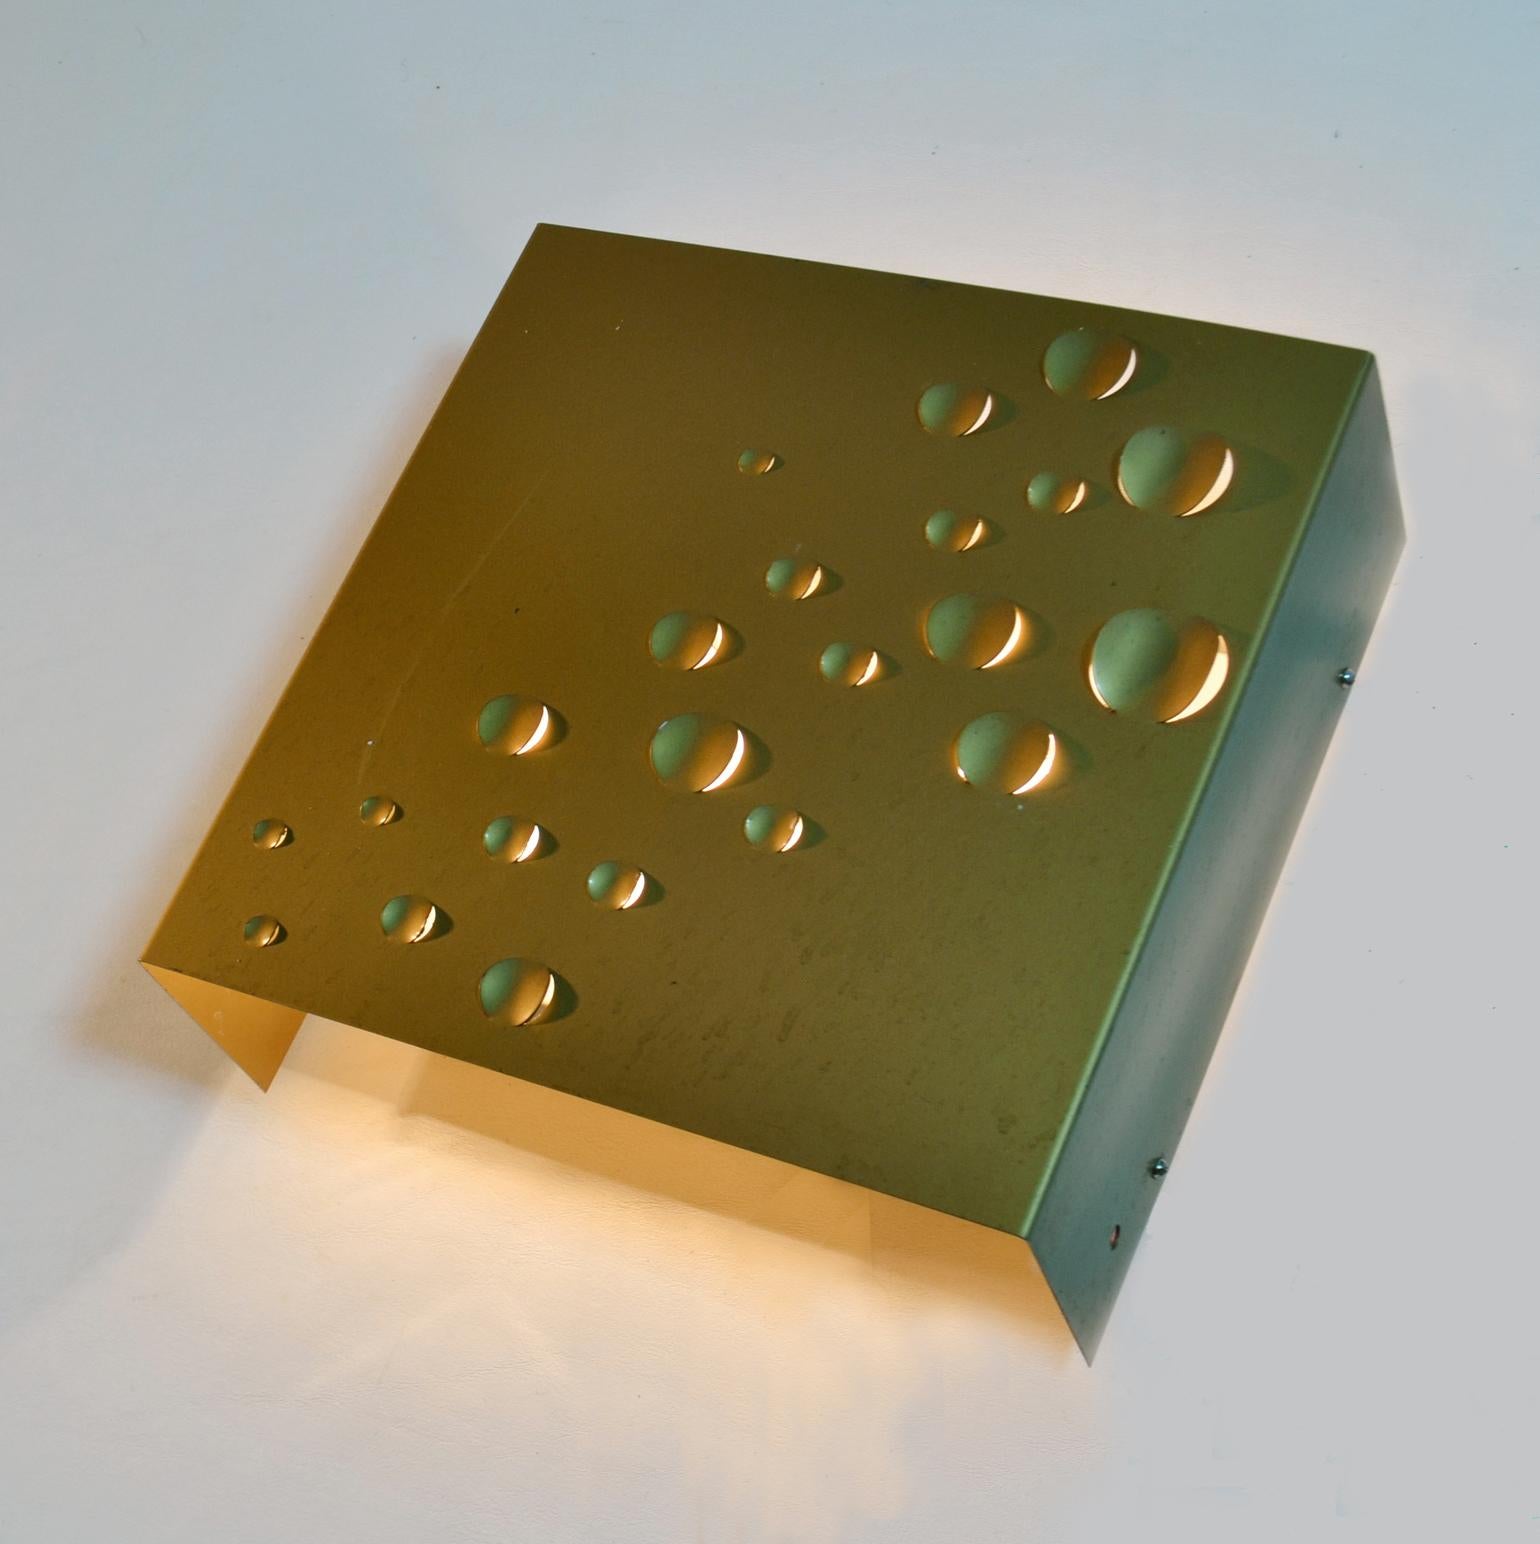 Minimalist Pair of Square Gold Metal Raindrop Wall Lamps by Jelle Jelles for RAAK 1965 For Sale